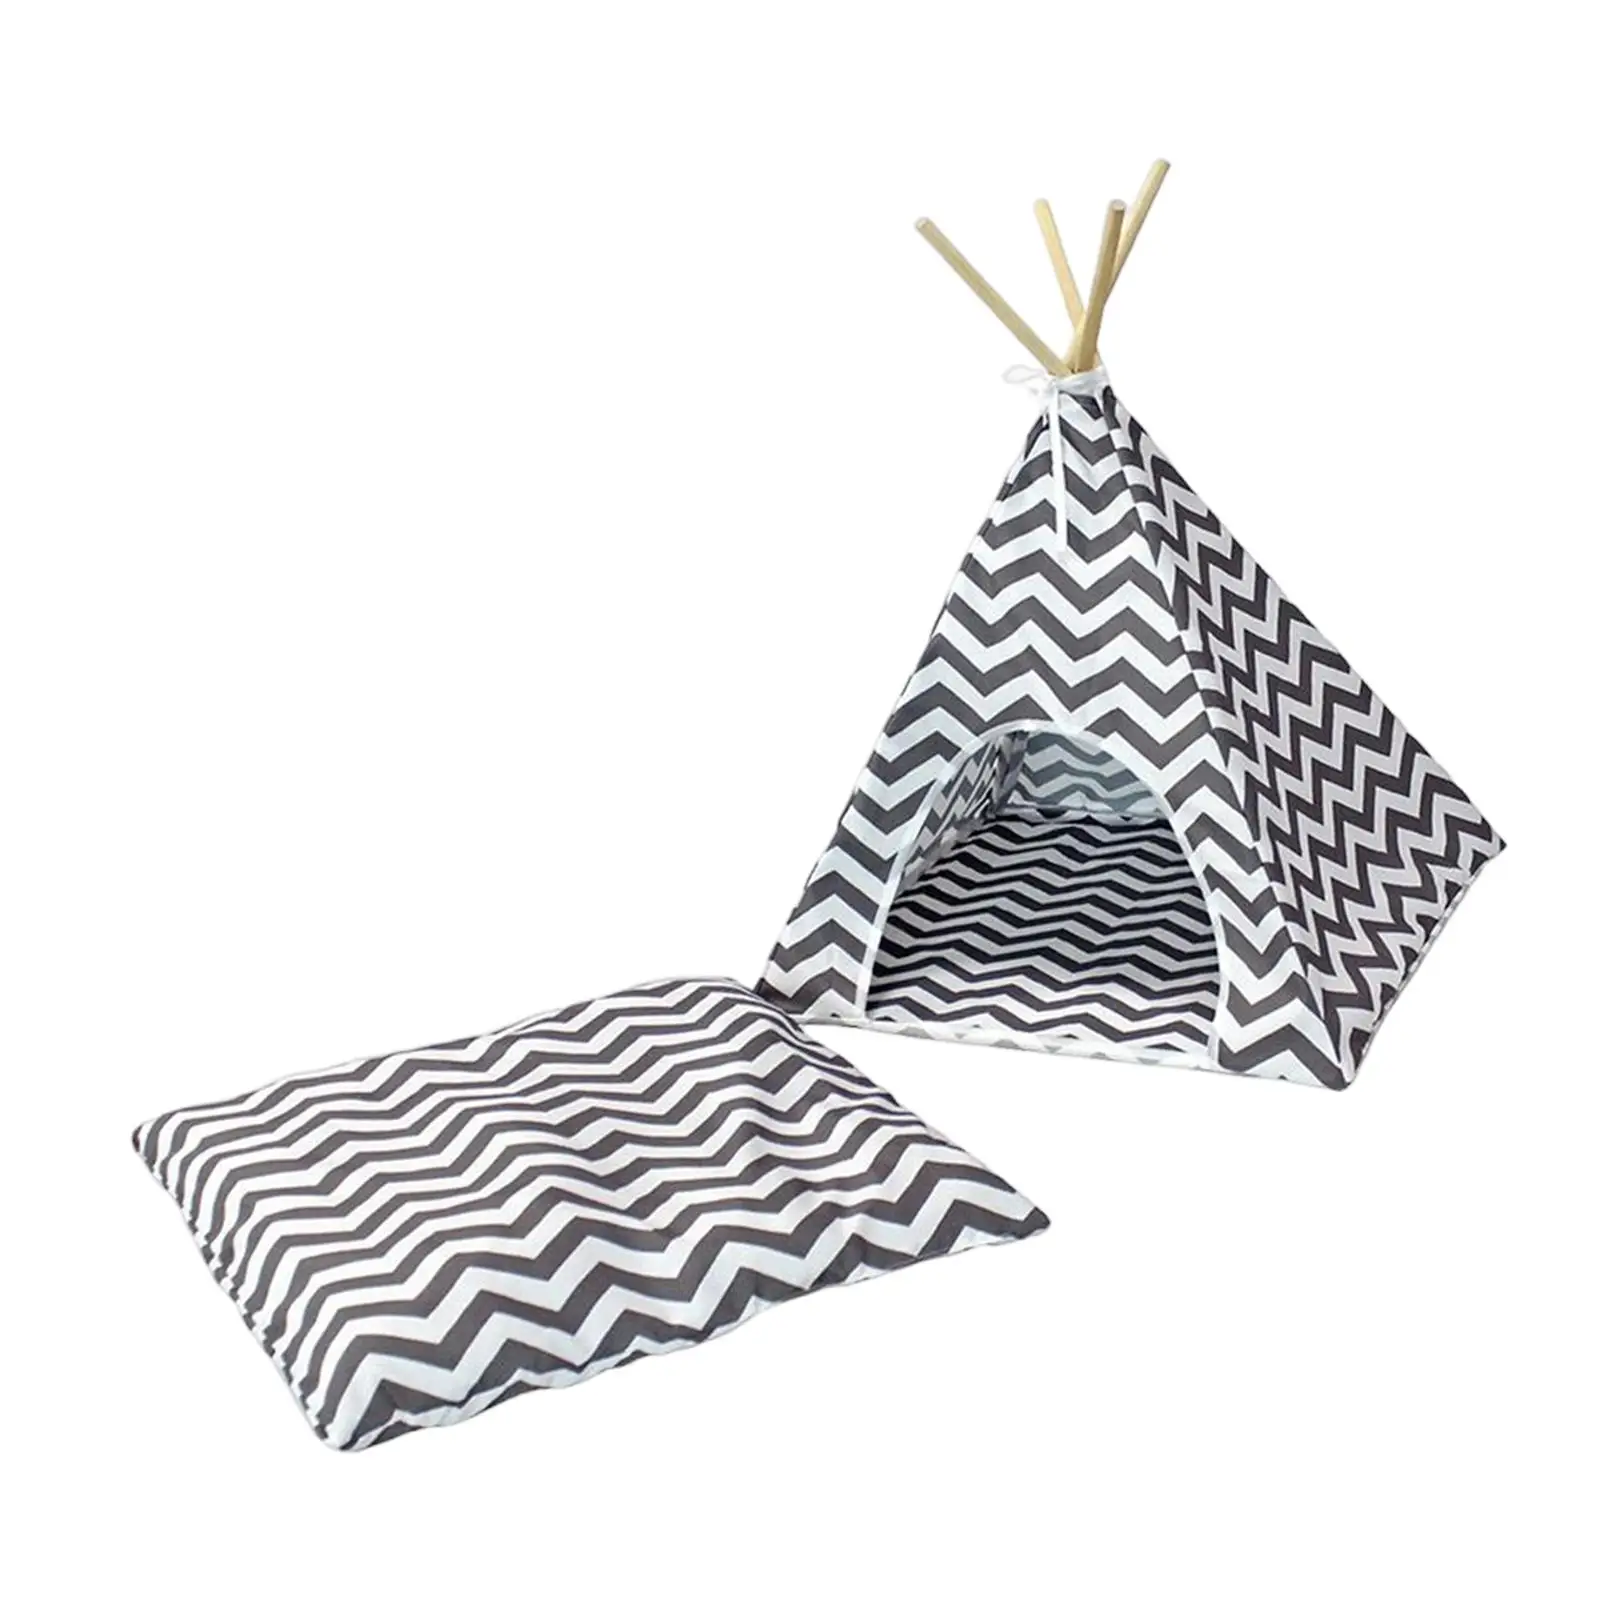 Portable Pet Teepee Dog House Cat Bed Tent Nest Cushion Shelter Mat Sleeping Bed Warm for Indoor Kitten Puppy Accessories